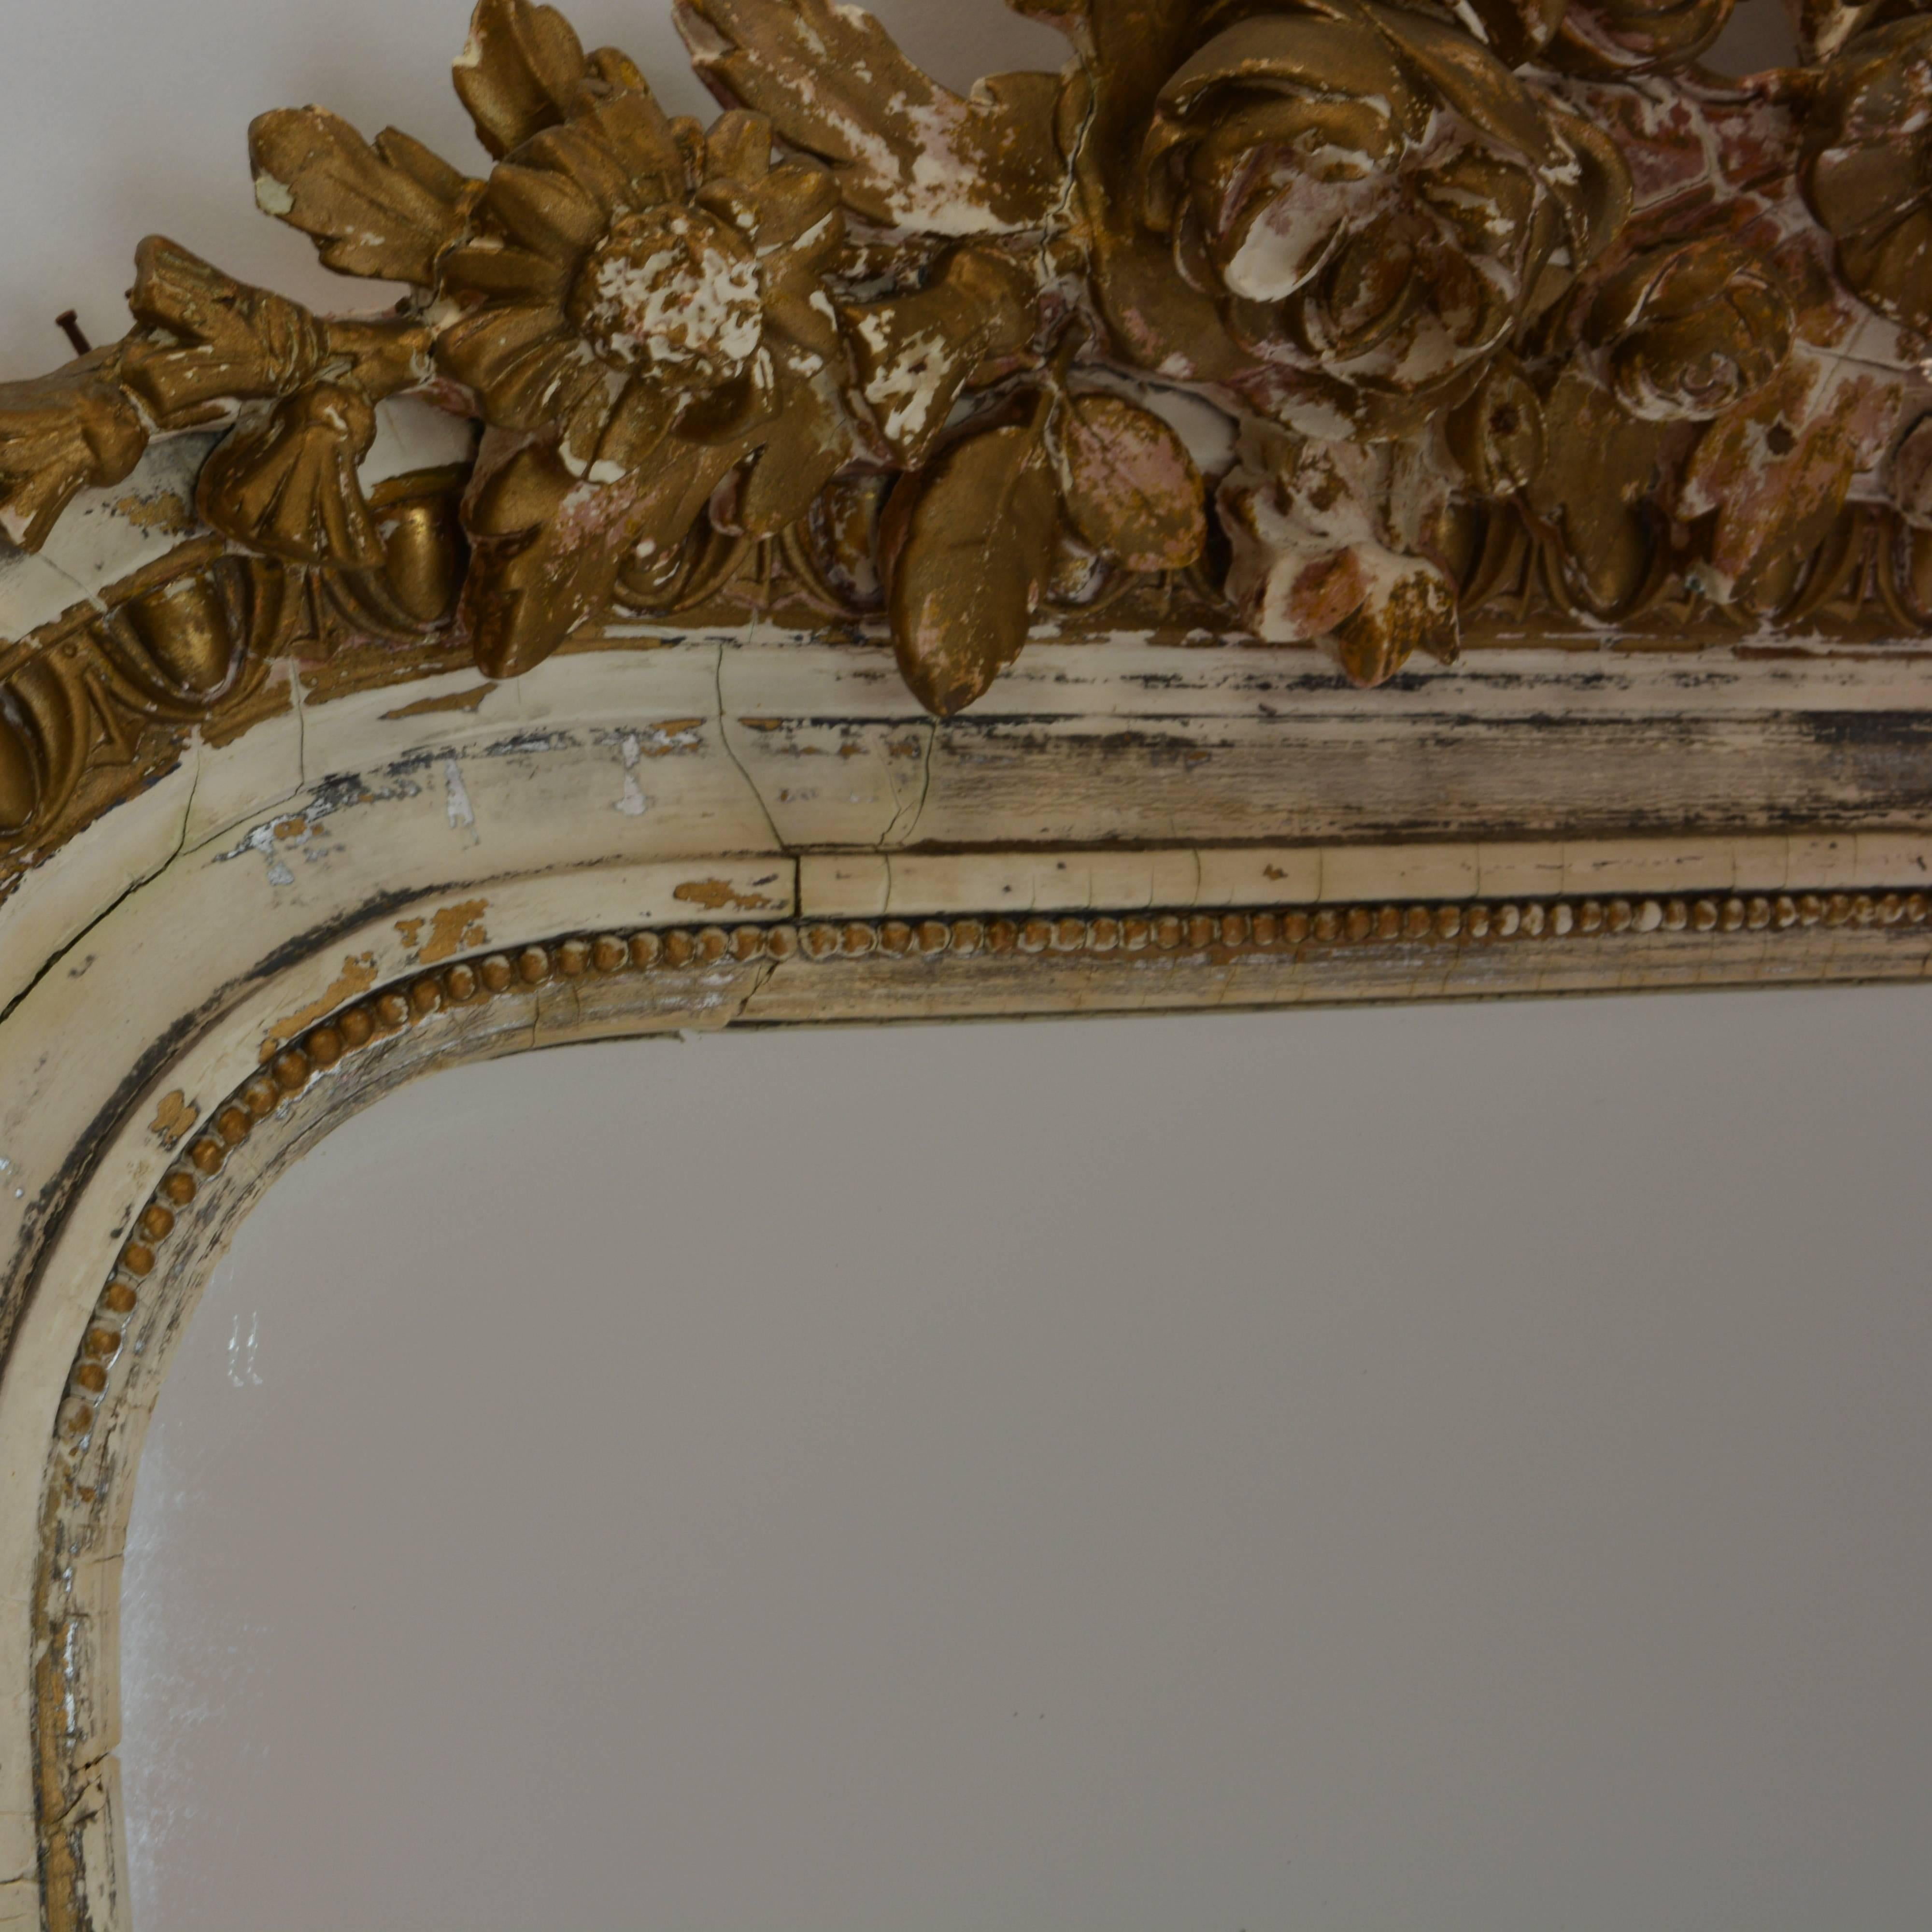 More than 6' tall and 3-1/2' wide, this stately old wall mirror from circa 1840 will provide a commanding presence in any room. Wonderfully detailed wooden frame and backing, crowned with an ornate bird design. Time has taken some of the original